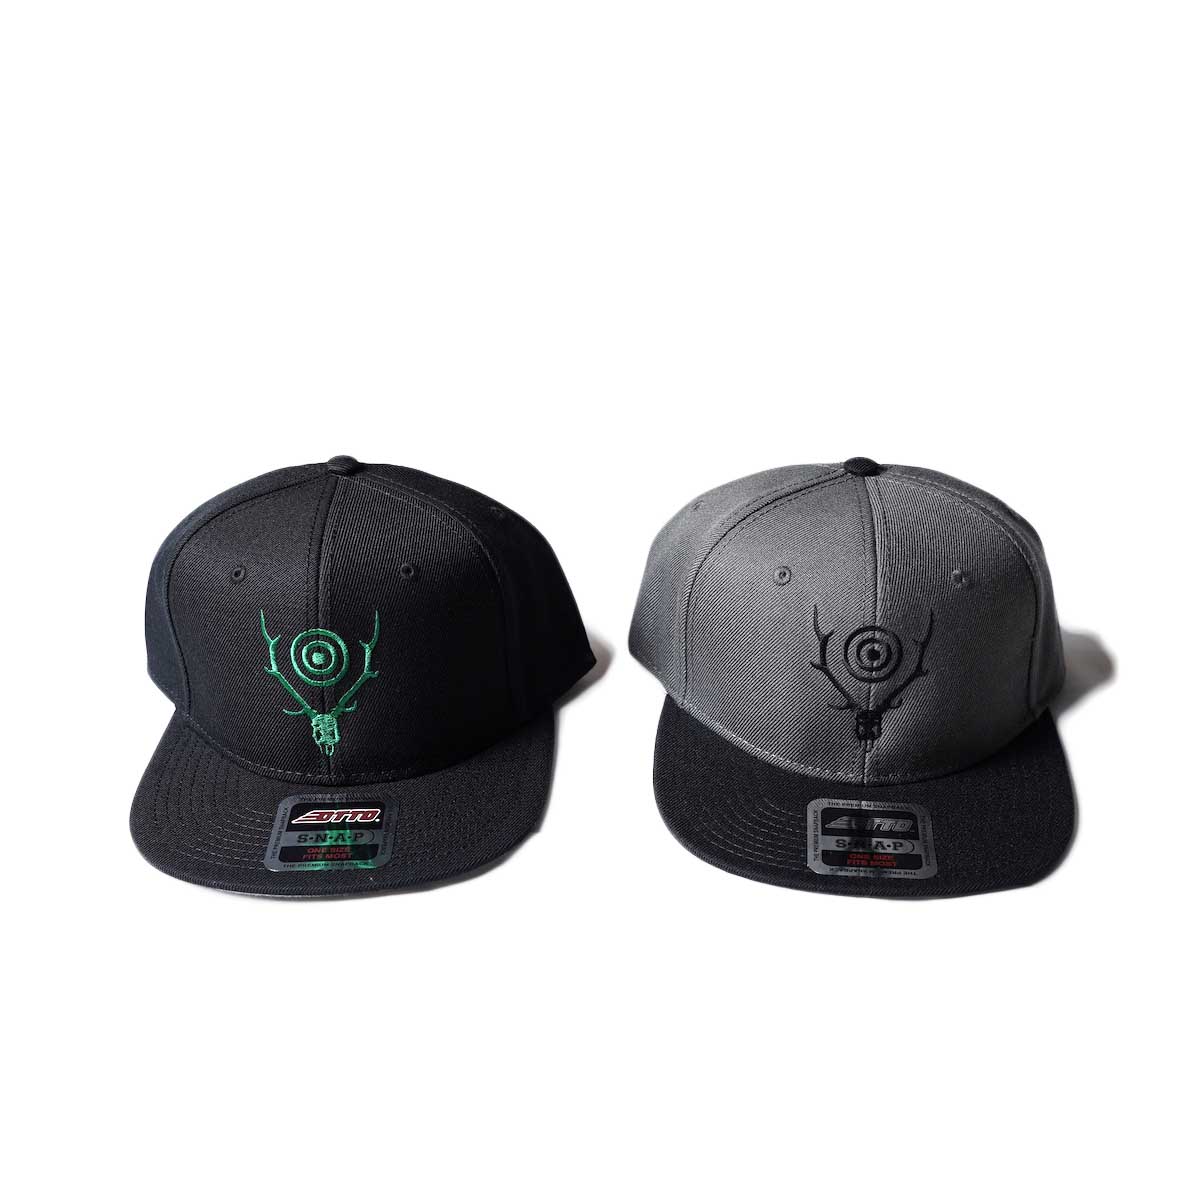 South2 West8 / BASEBALL CAP - S&T EMB. 正面